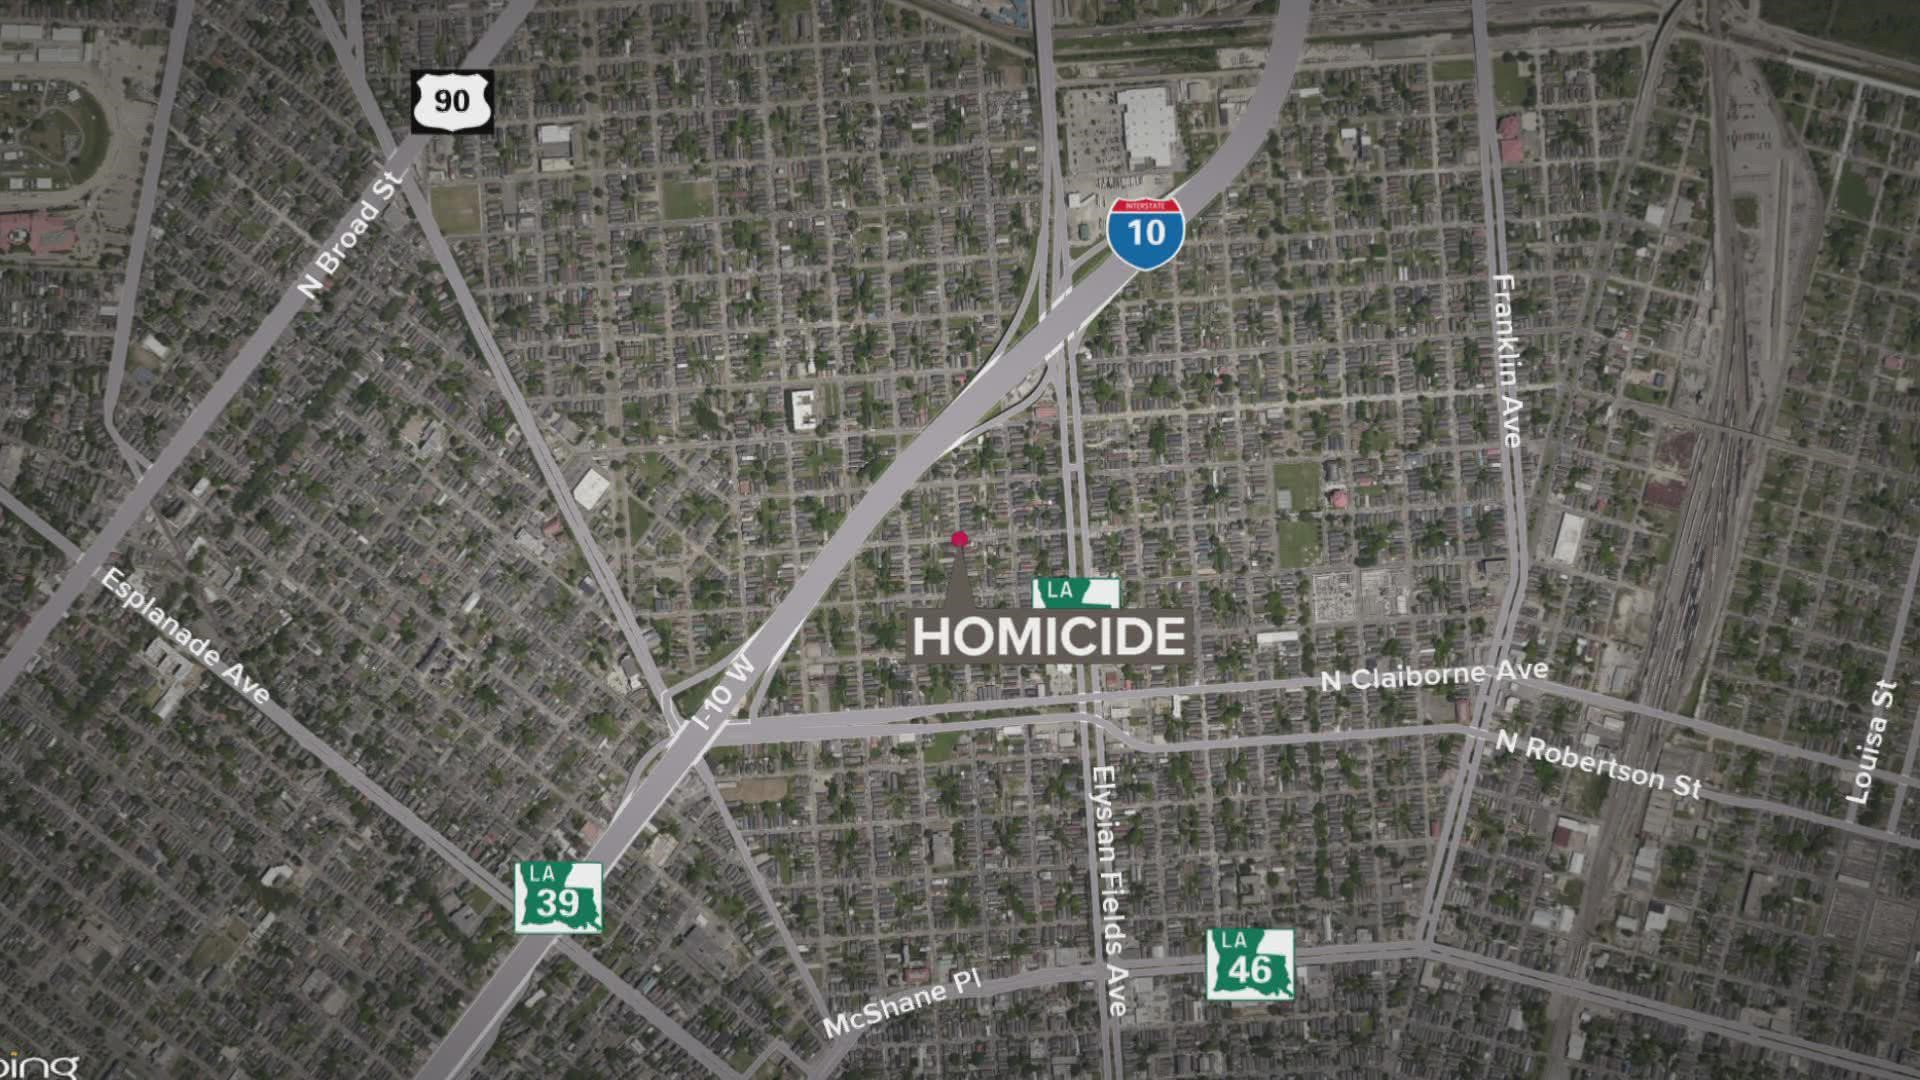 NOPD is looking into two deadly crimes Saturday night that a man and a woman dead.